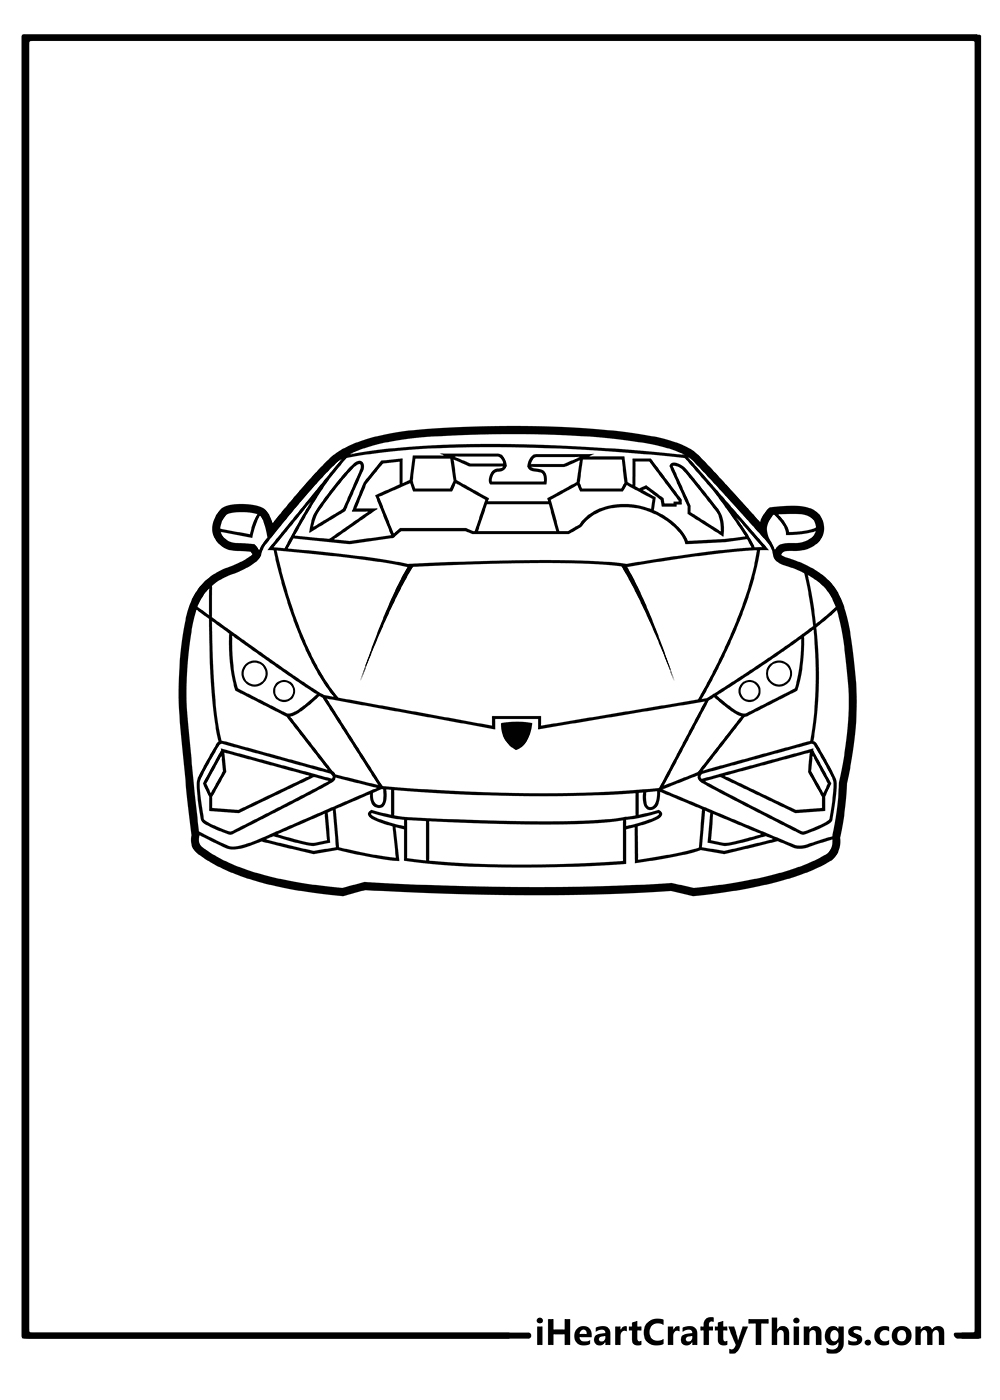 Lamborghini Coloring Pages for kids free download